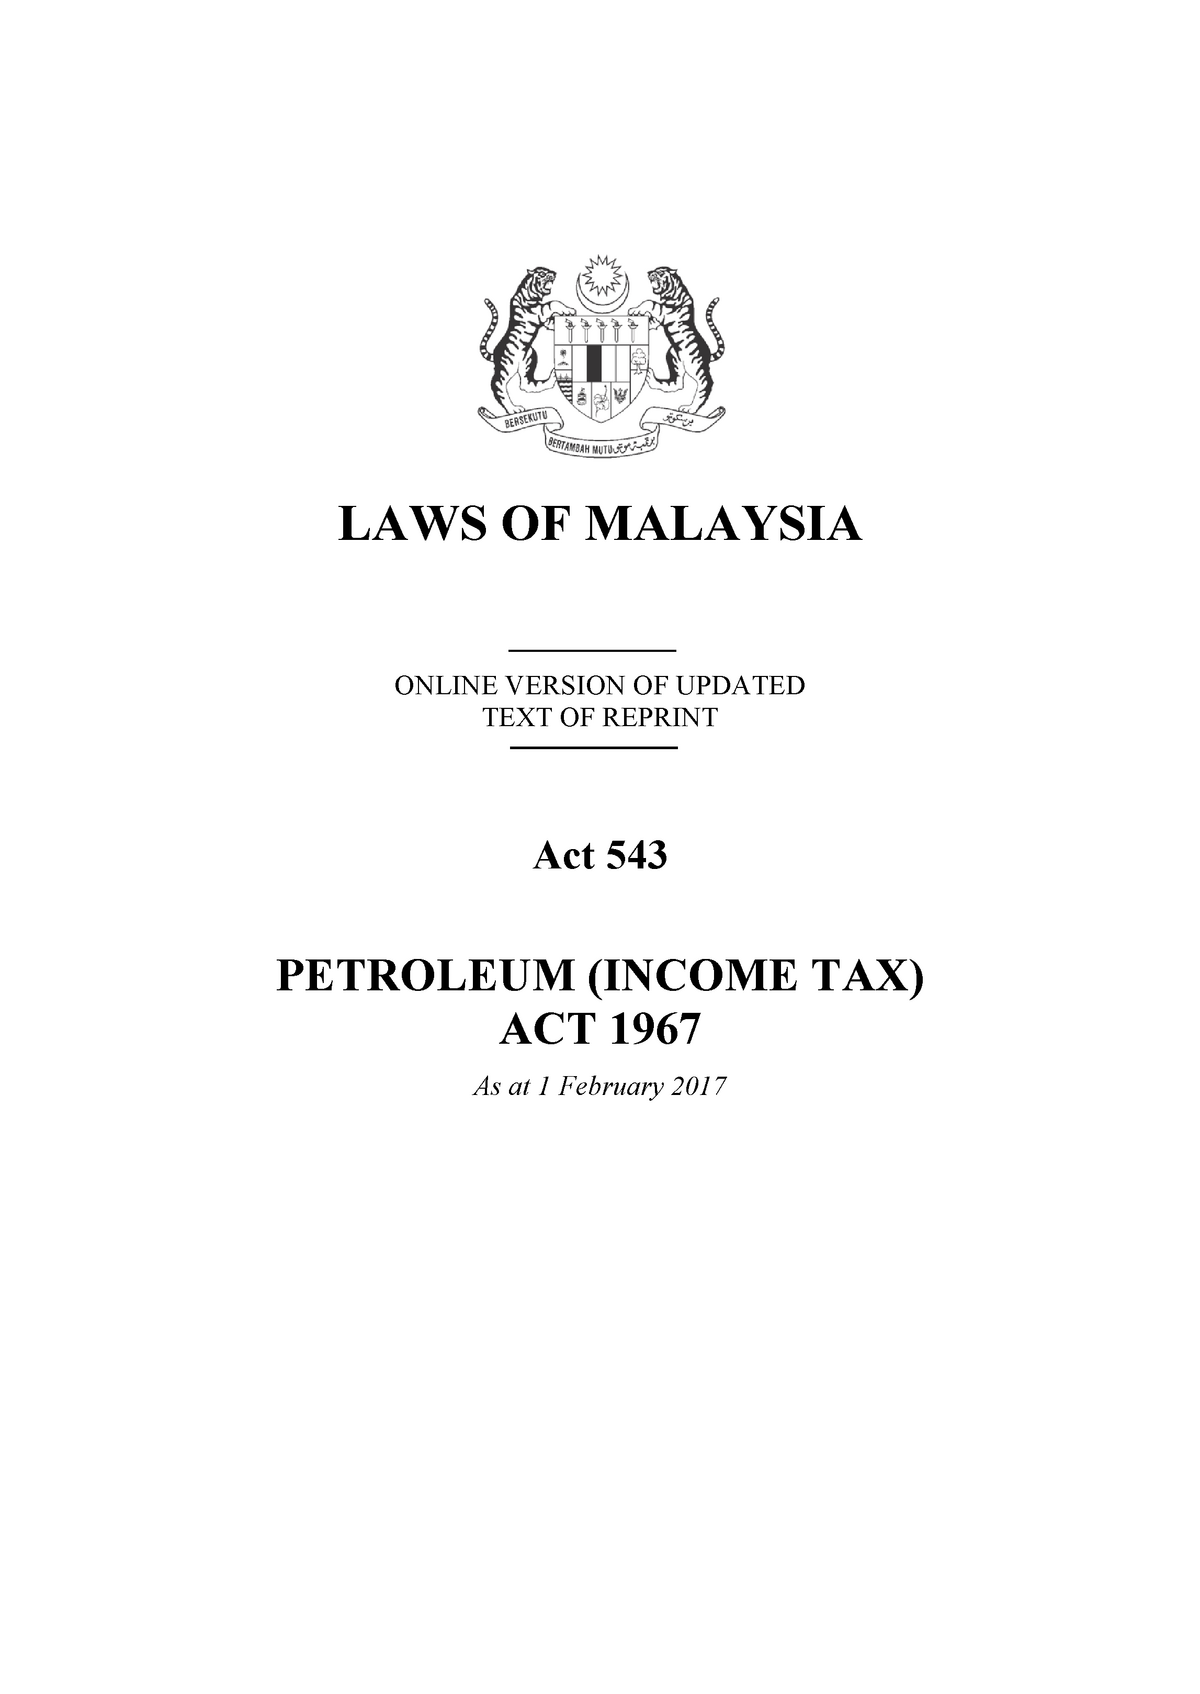 Malaysia tax act 1967 LAWS OF MALAYSIA ONLINE VERSION OF